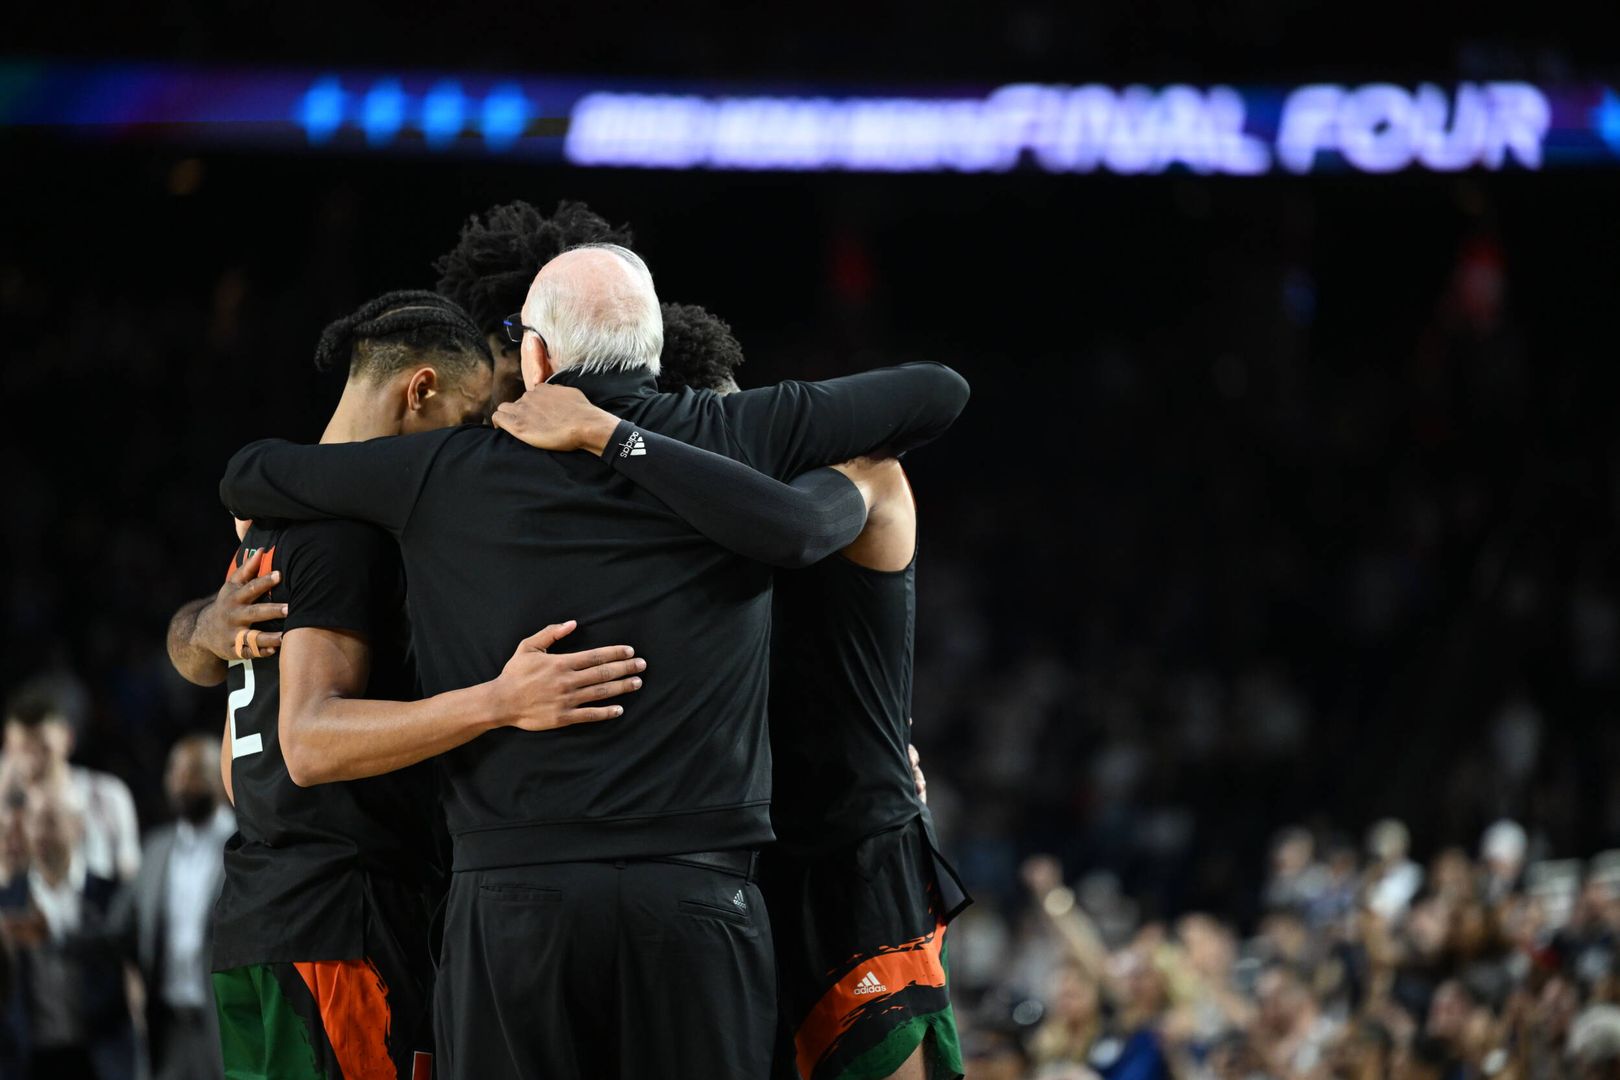 MBB Falls to Connecticut, 72-59, in Final Four